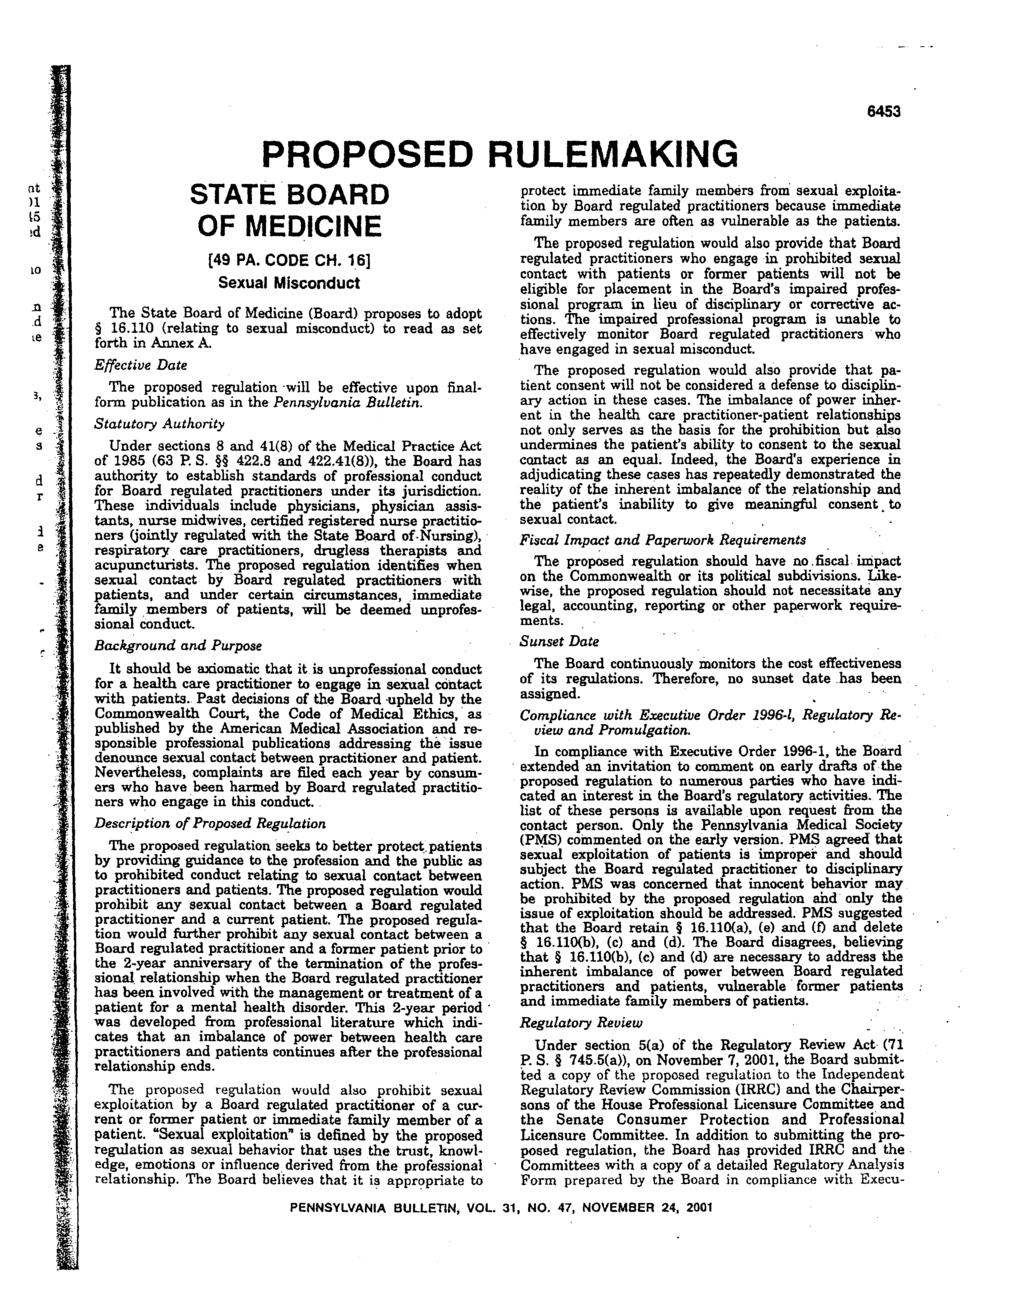 PROPOSED RULEMAKING STATE BOARD OF MEDICINE [49 PA. CODE CH. 16] Sexual Misconduct The State Board of Medicine (Board) proposes to adopt 16.